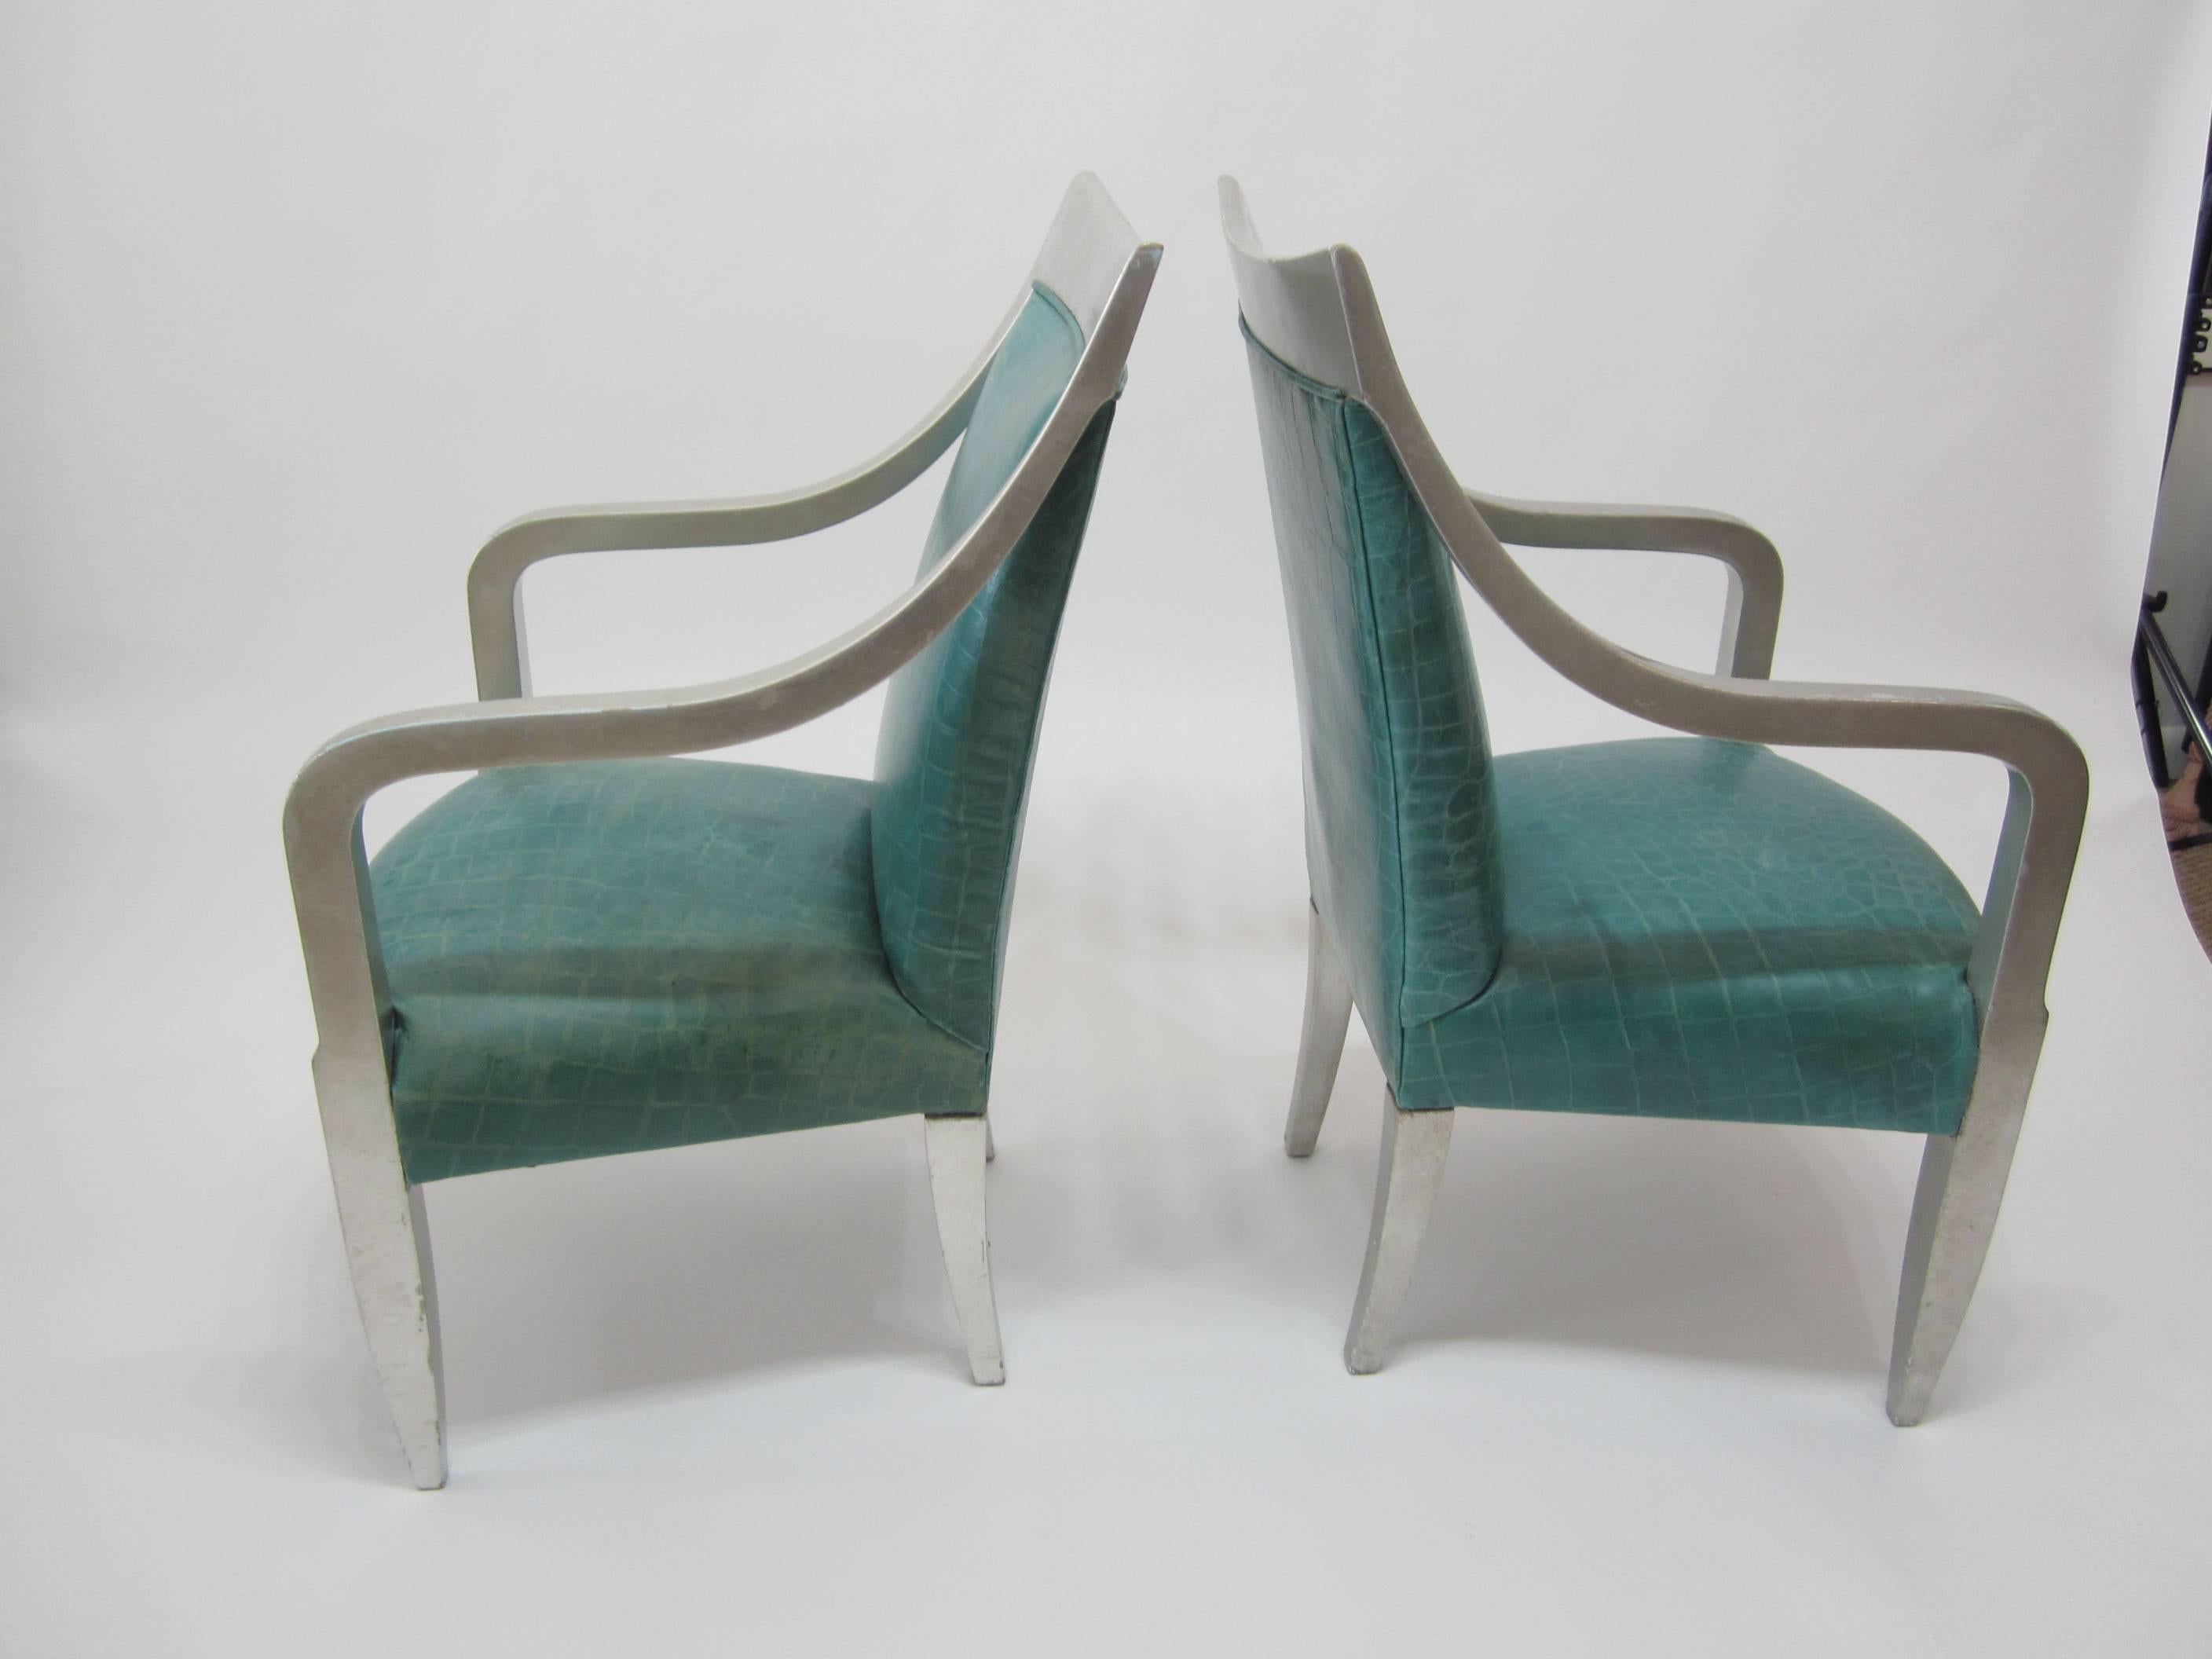 Pair of Silver Leaf Croc-Embossed Leather Armchairs by Donghia  2